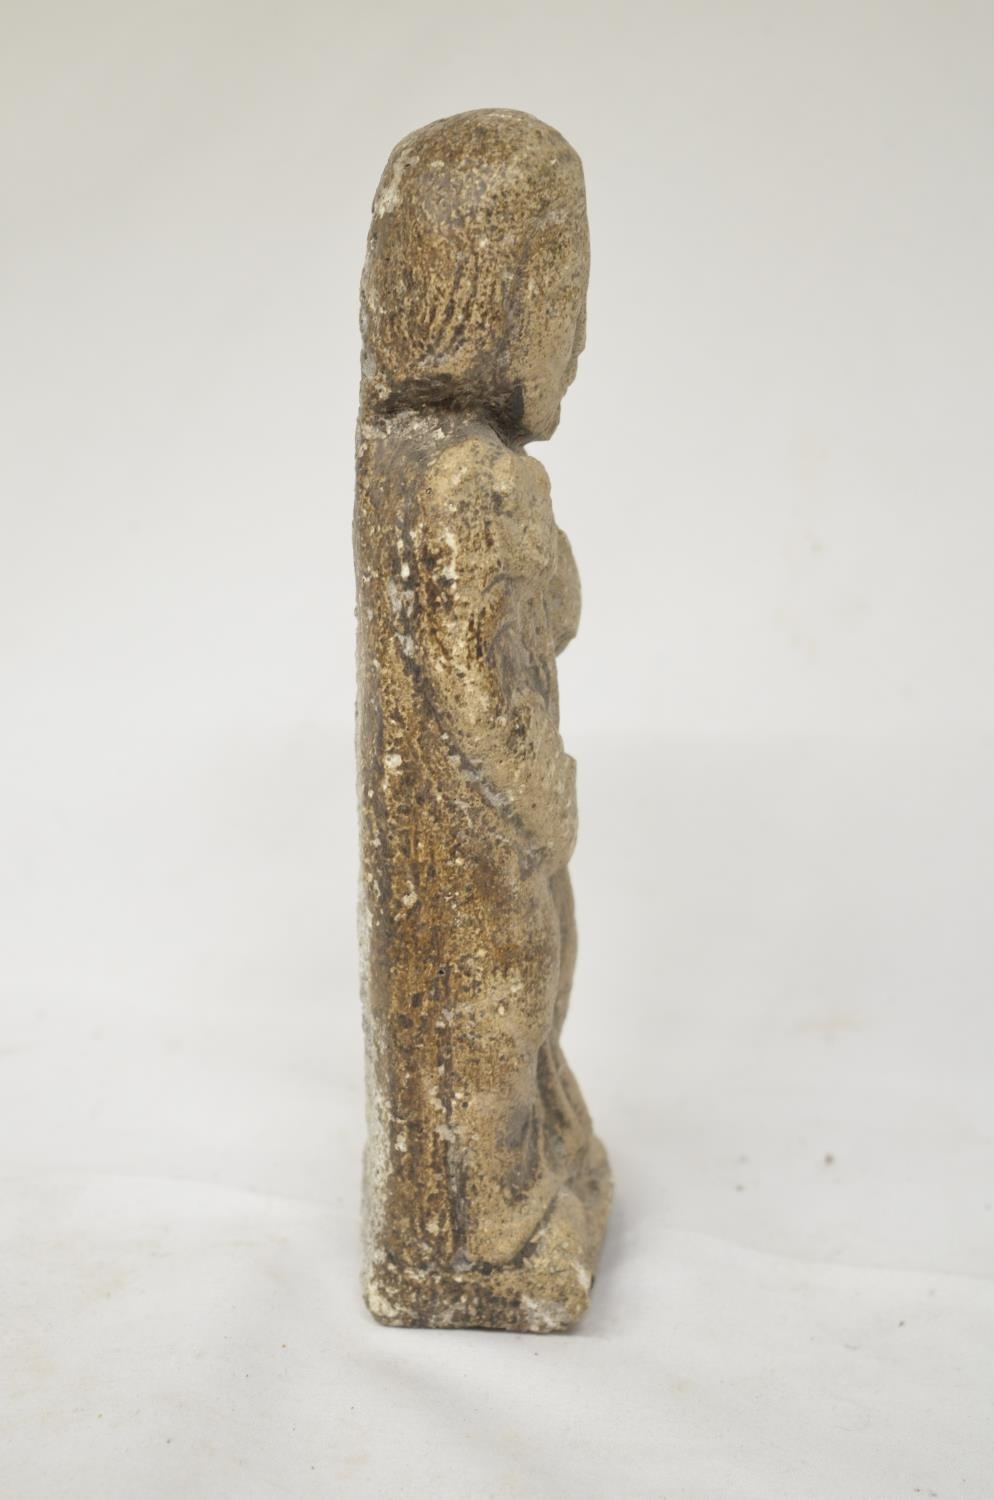 Stone carved Romanesque saintly figure, circa 11th-12th century. H19cm (Victor Brox collection) - Image 4 of 5